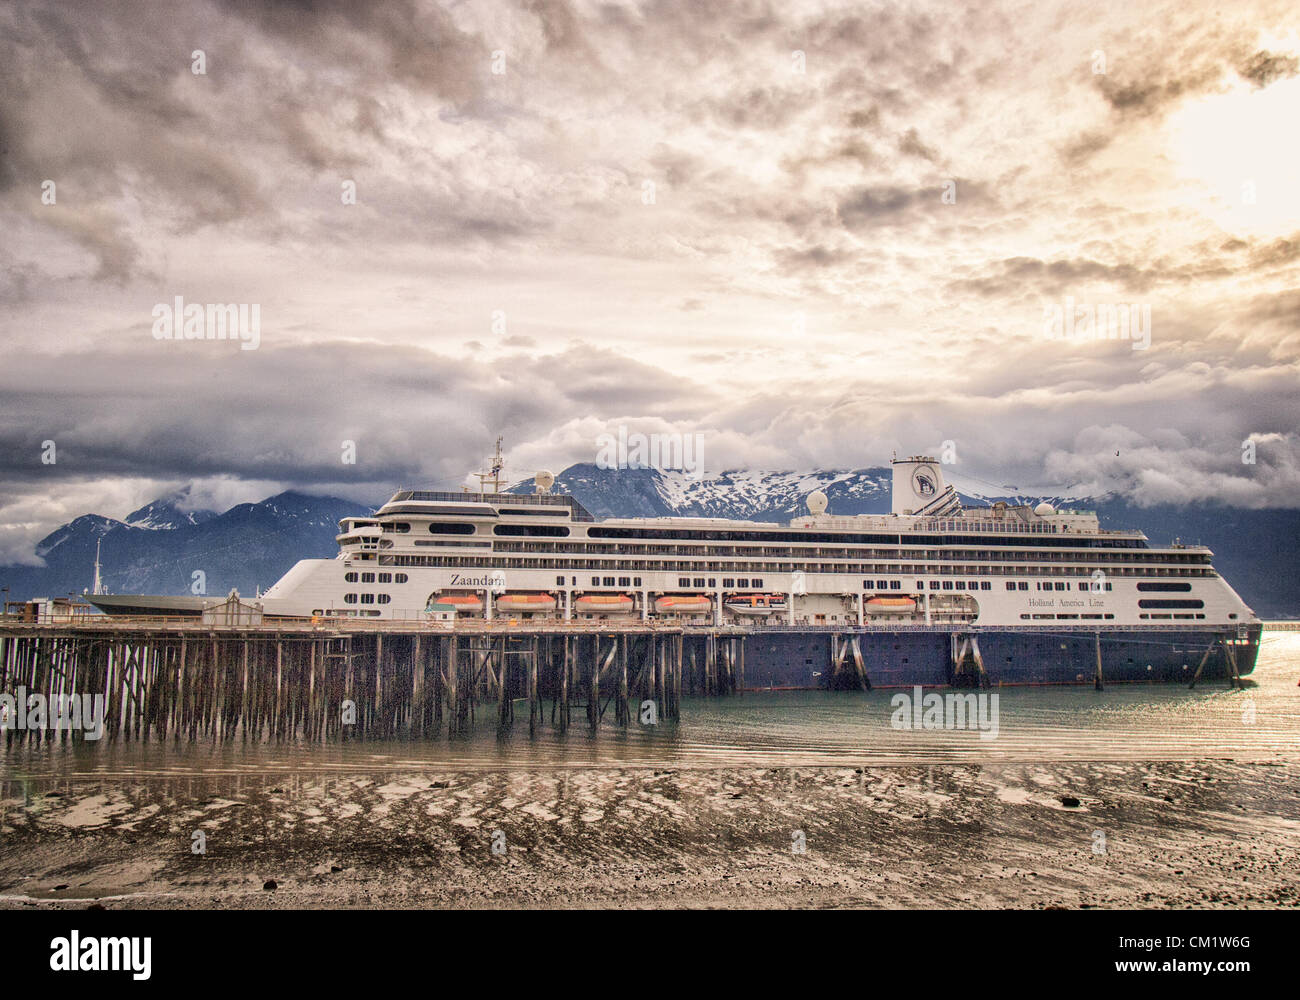 July 4, 2012 - Haines, Alaska, US - The ms Zaandam, a Holland America Line cruise ship, docked in Portage Cove at Haines, Alaska in early morning light. Dramatic clouds and the Chilkoot Mountain Range, part of the Coastal Range of mountains, form a spectacular backdrop. (Credit Image: © Arnold Drapkin/ZUMAPRESS.com) Stock Photo